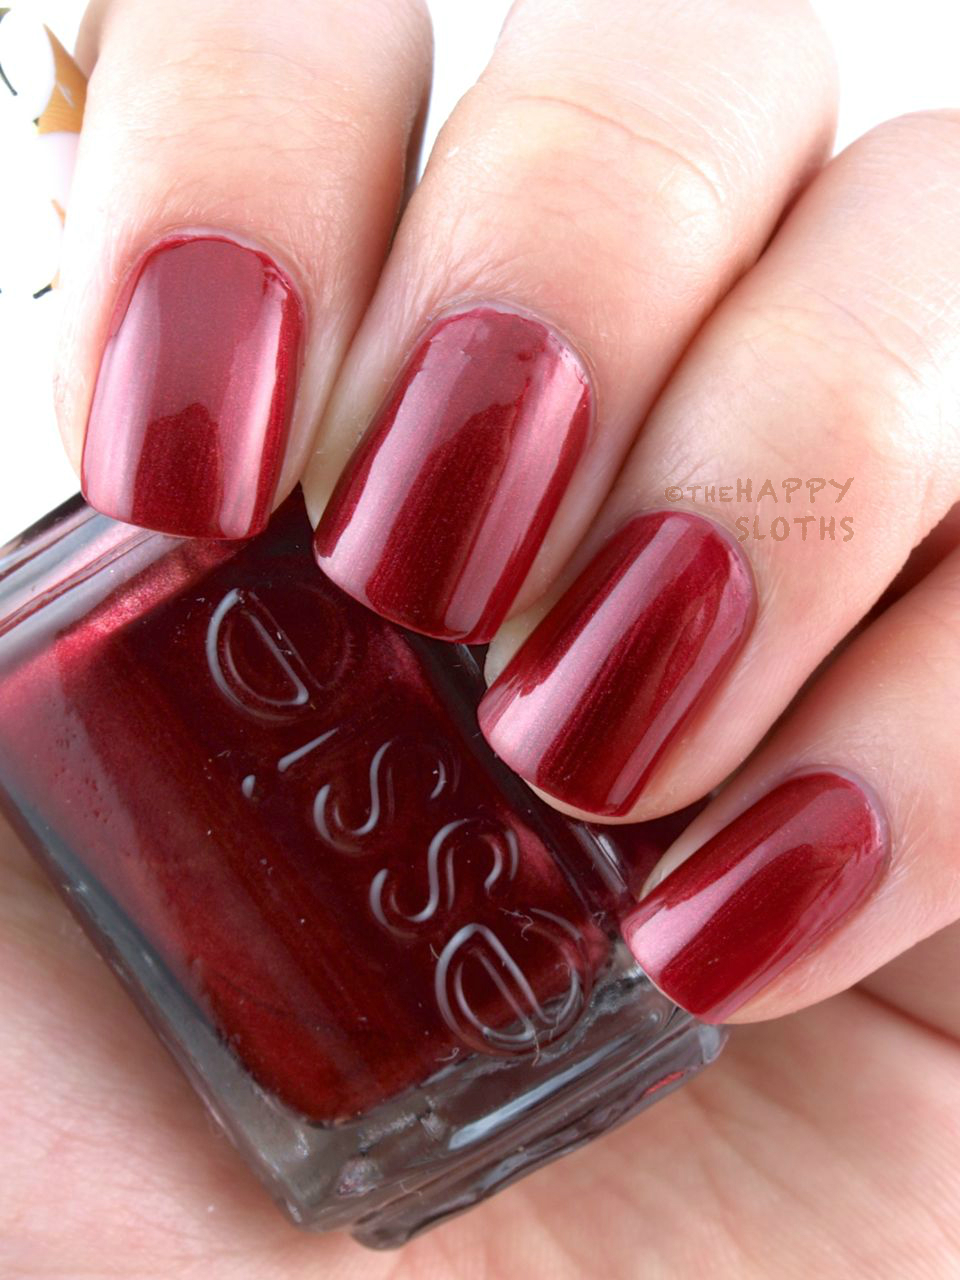 Essie Retro Revival 2016 Collection: Review and Swatches | The Happy ...